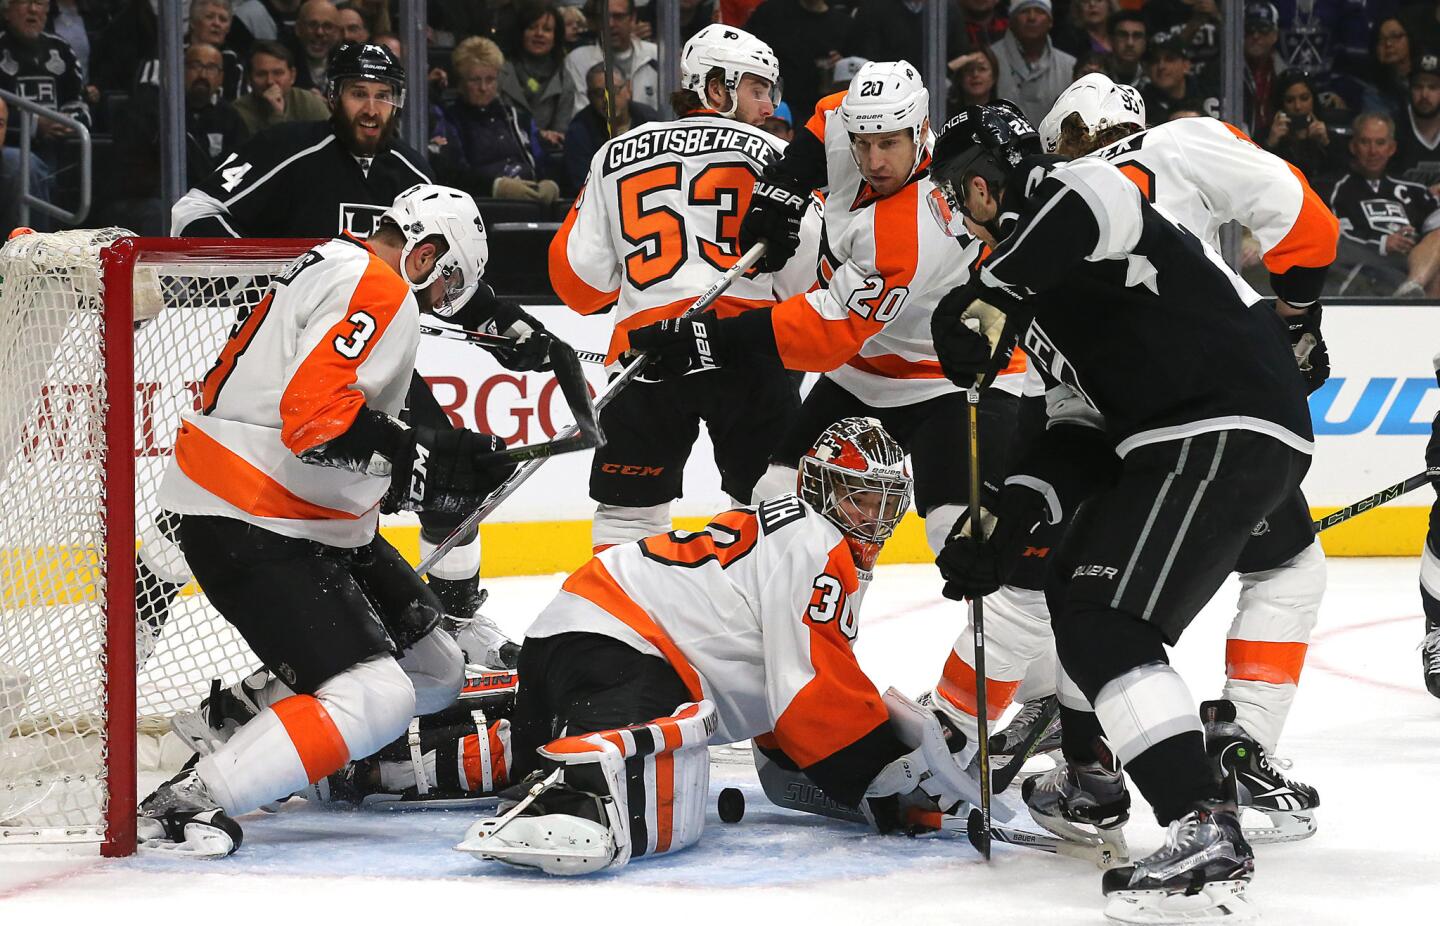 Kings center Trevor Lewis tries to poke the puck past Flyers goalie Michal Neuvirth in the first period Saturday.